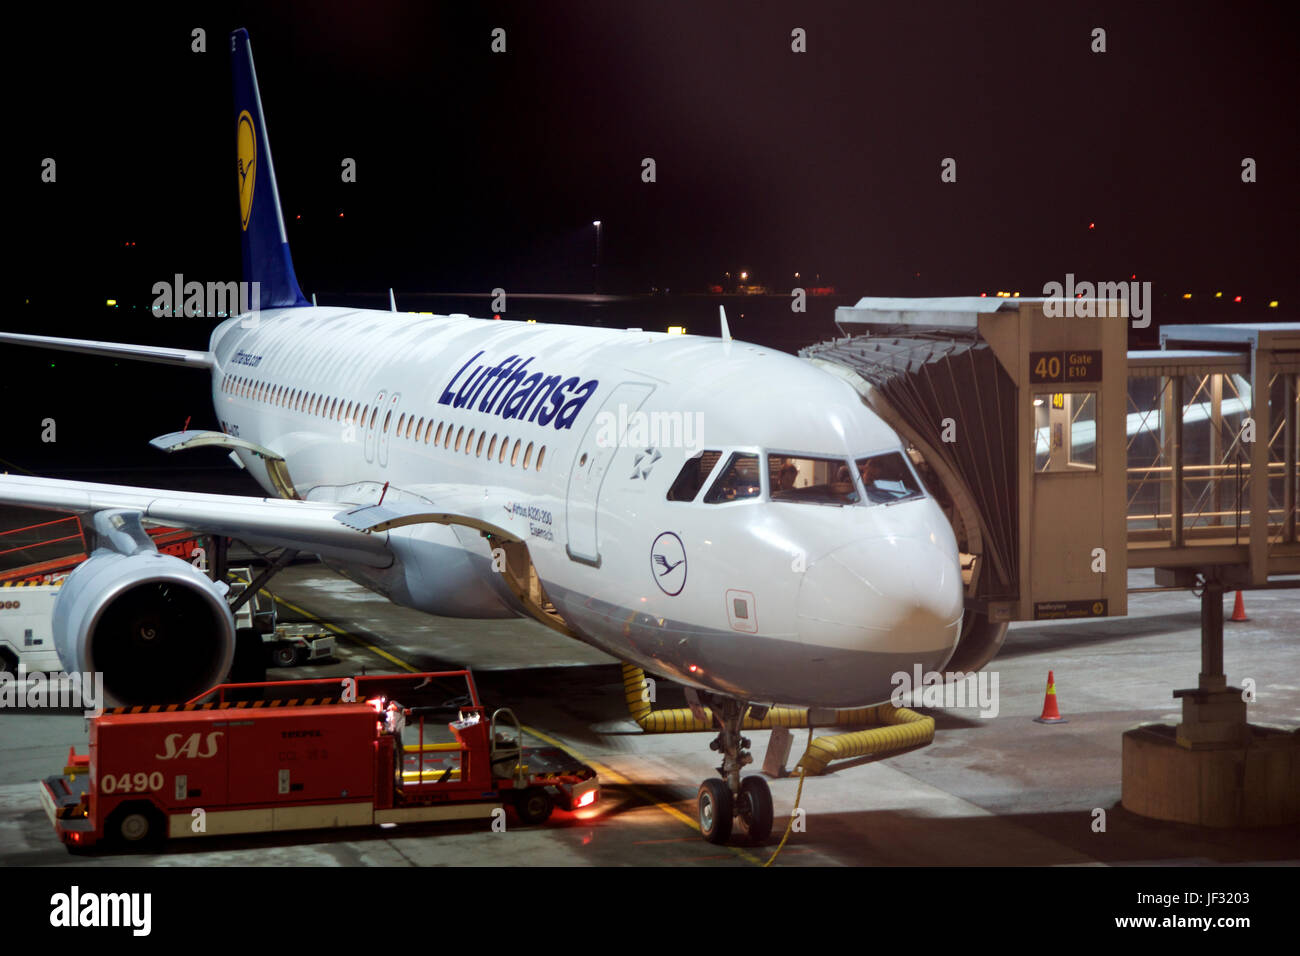 OSLO, NORWAY - JAN 21st, 2017: Lufthansa Airbus A320 airplane at the gate ready for boarding, early in the morning during winter Stock Photo